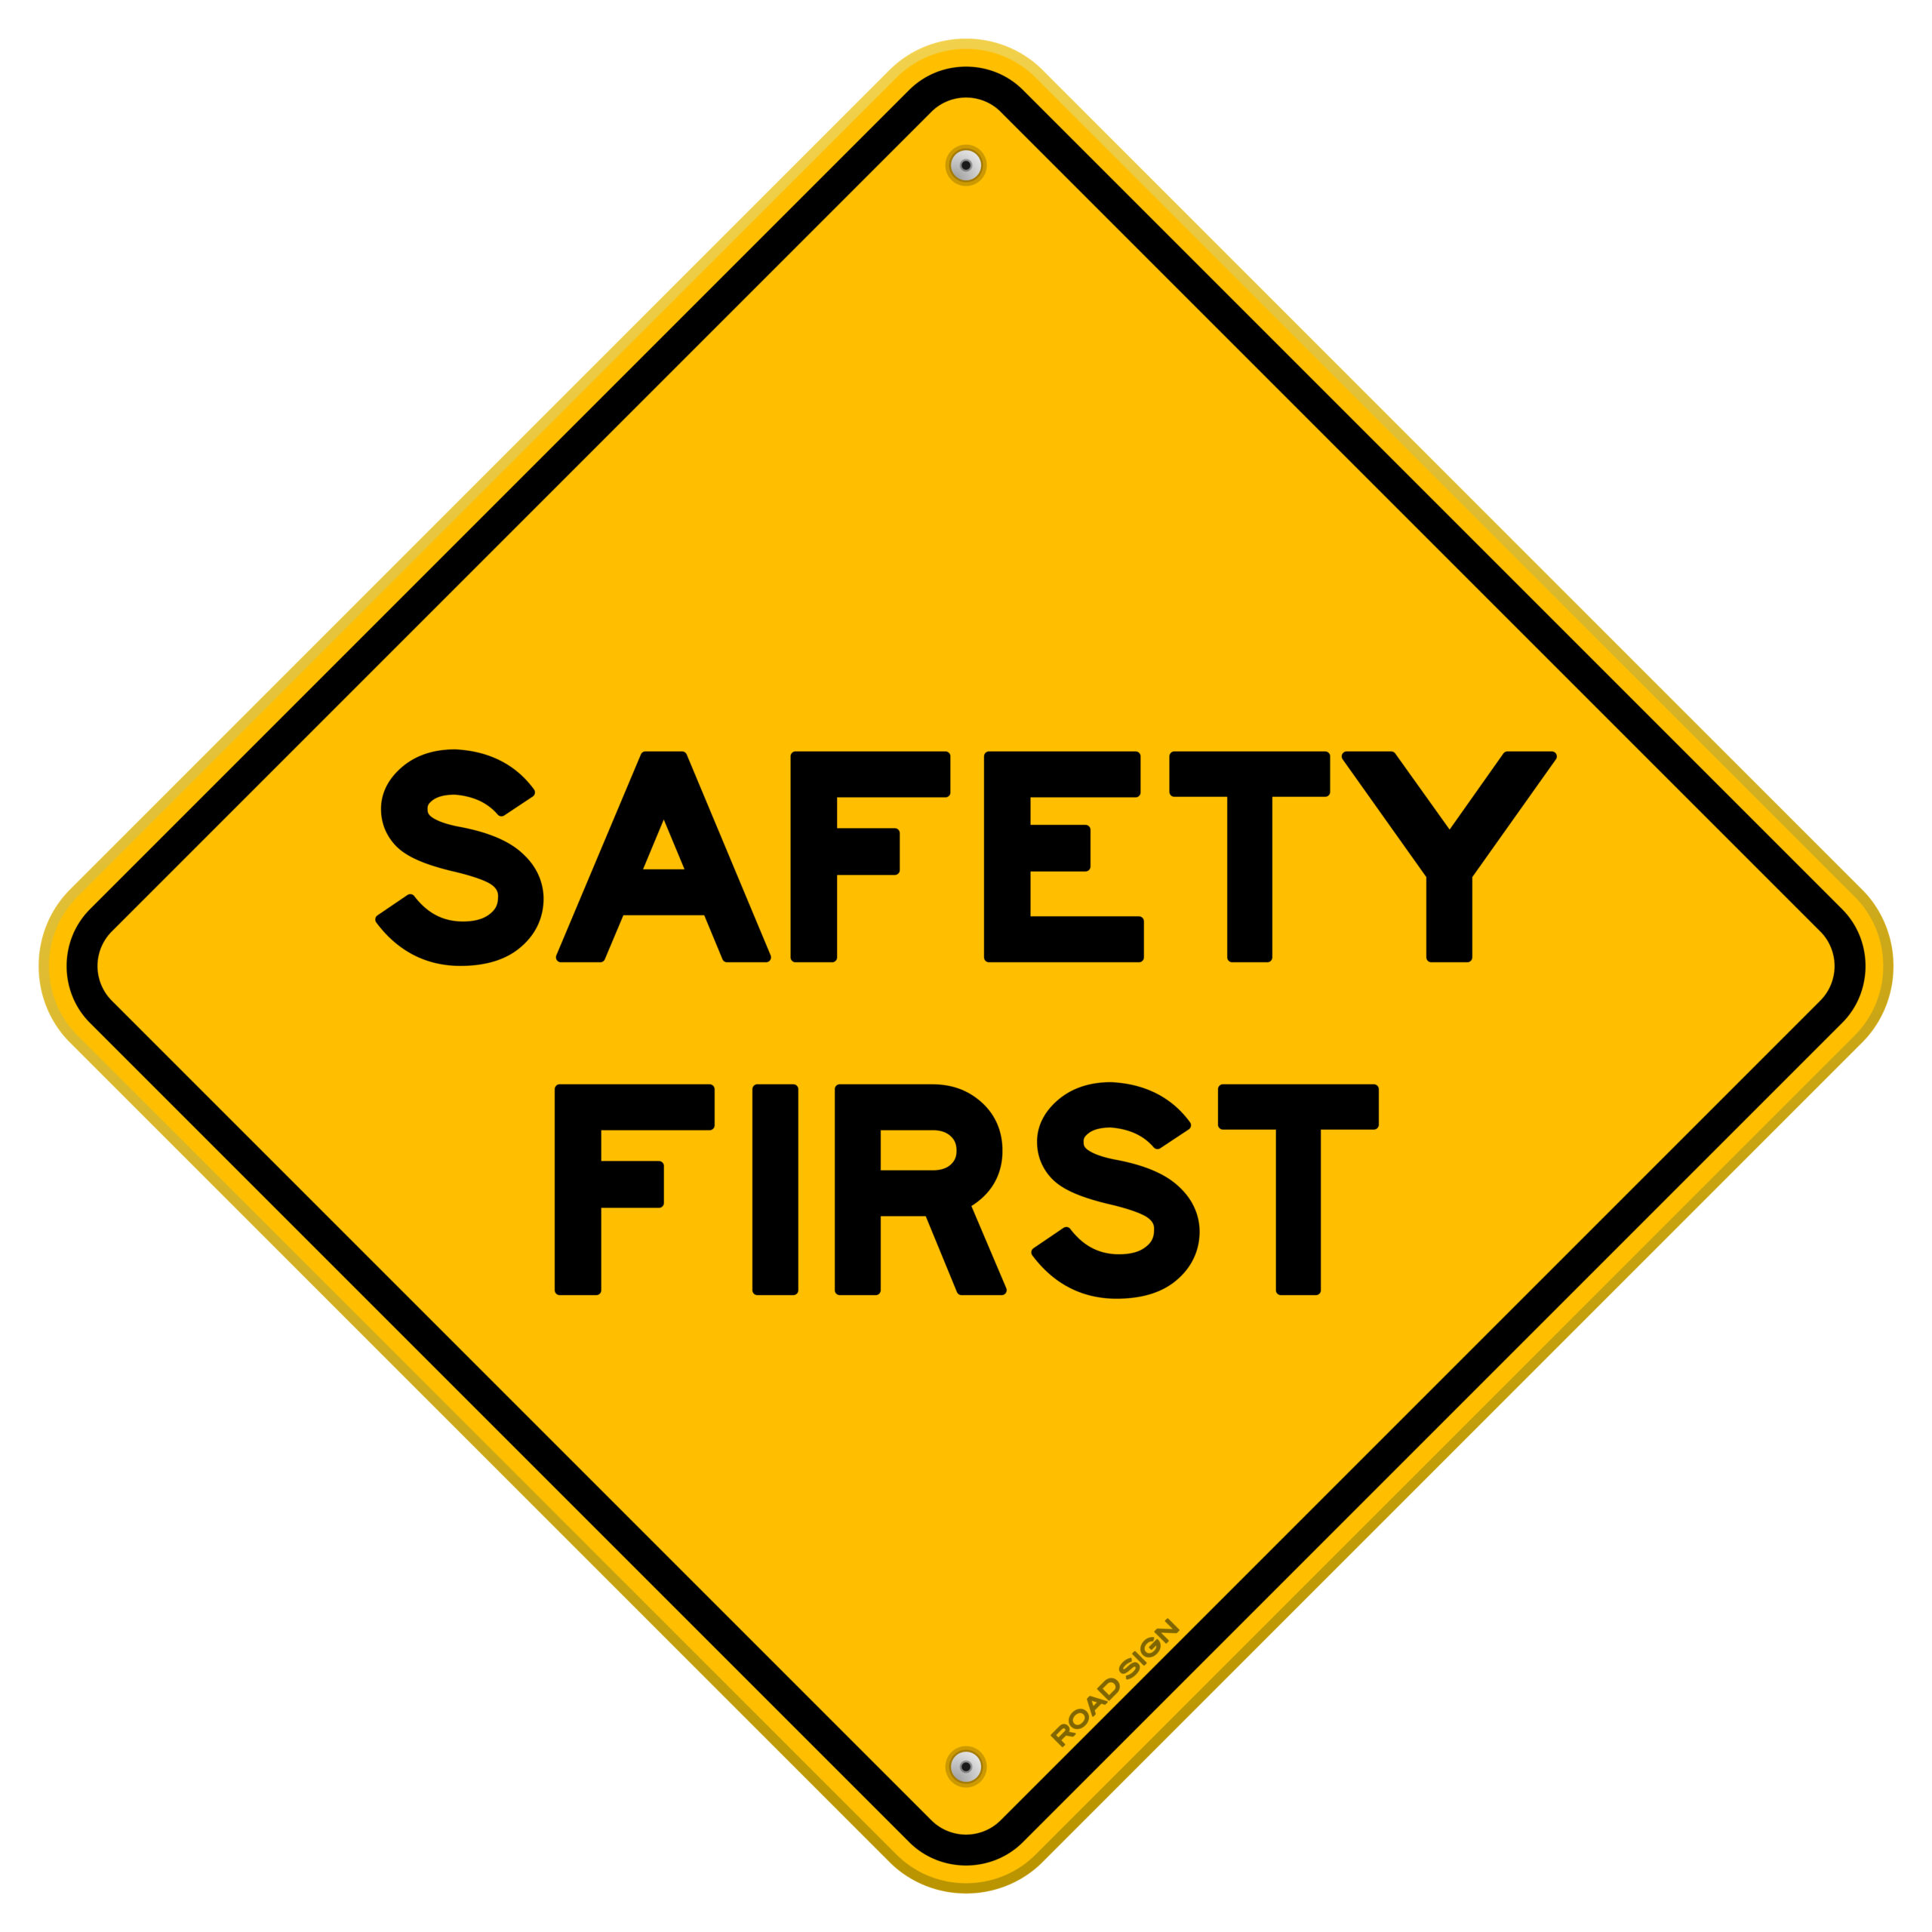 Safety First, Personal Safety, Professional Safety